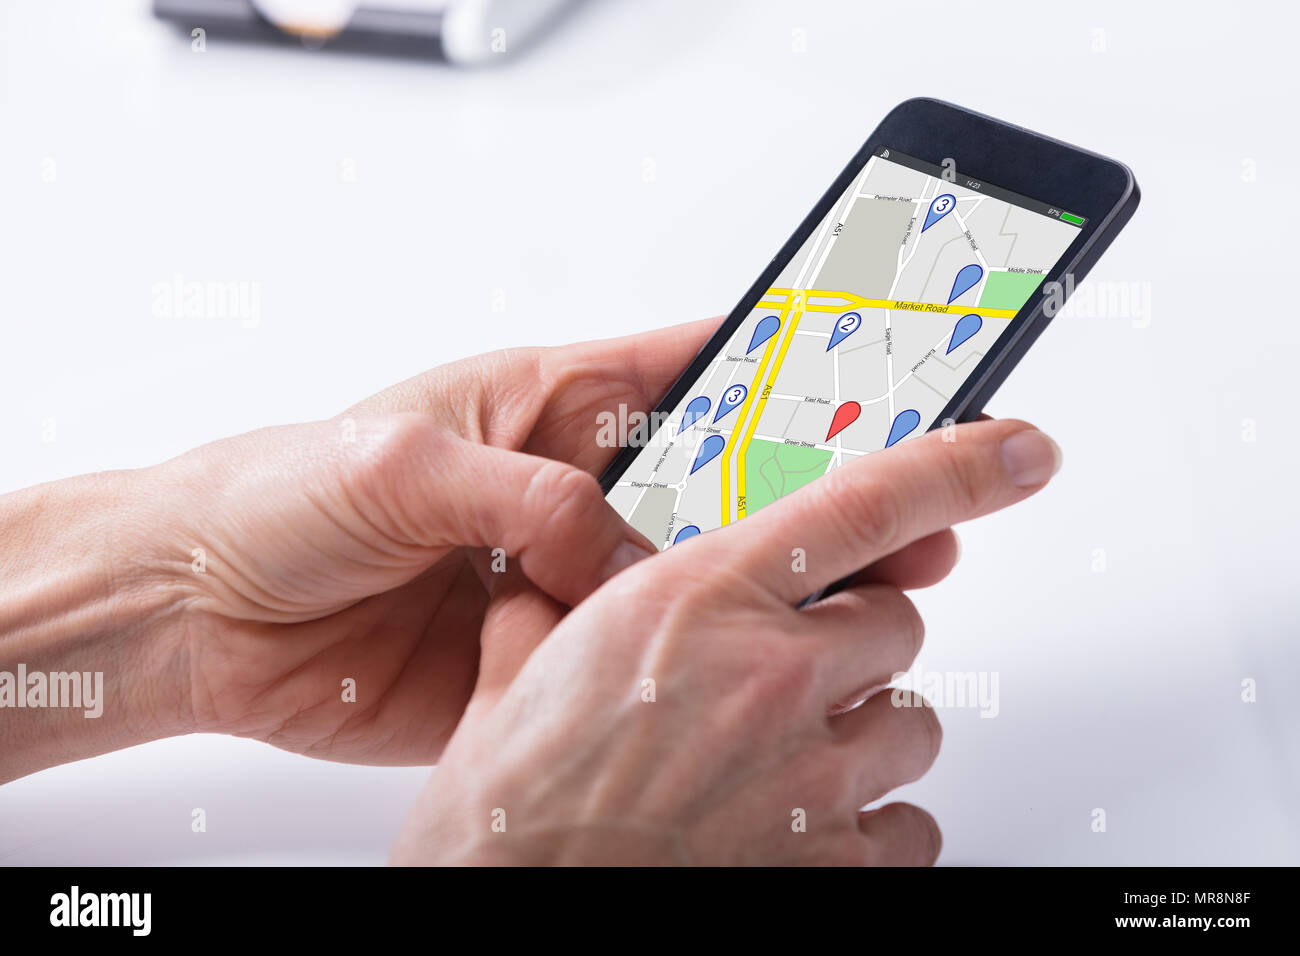 Close-up Of A Person's Hand Using GPS Navigation Map On Mobile Phone Stock Photo